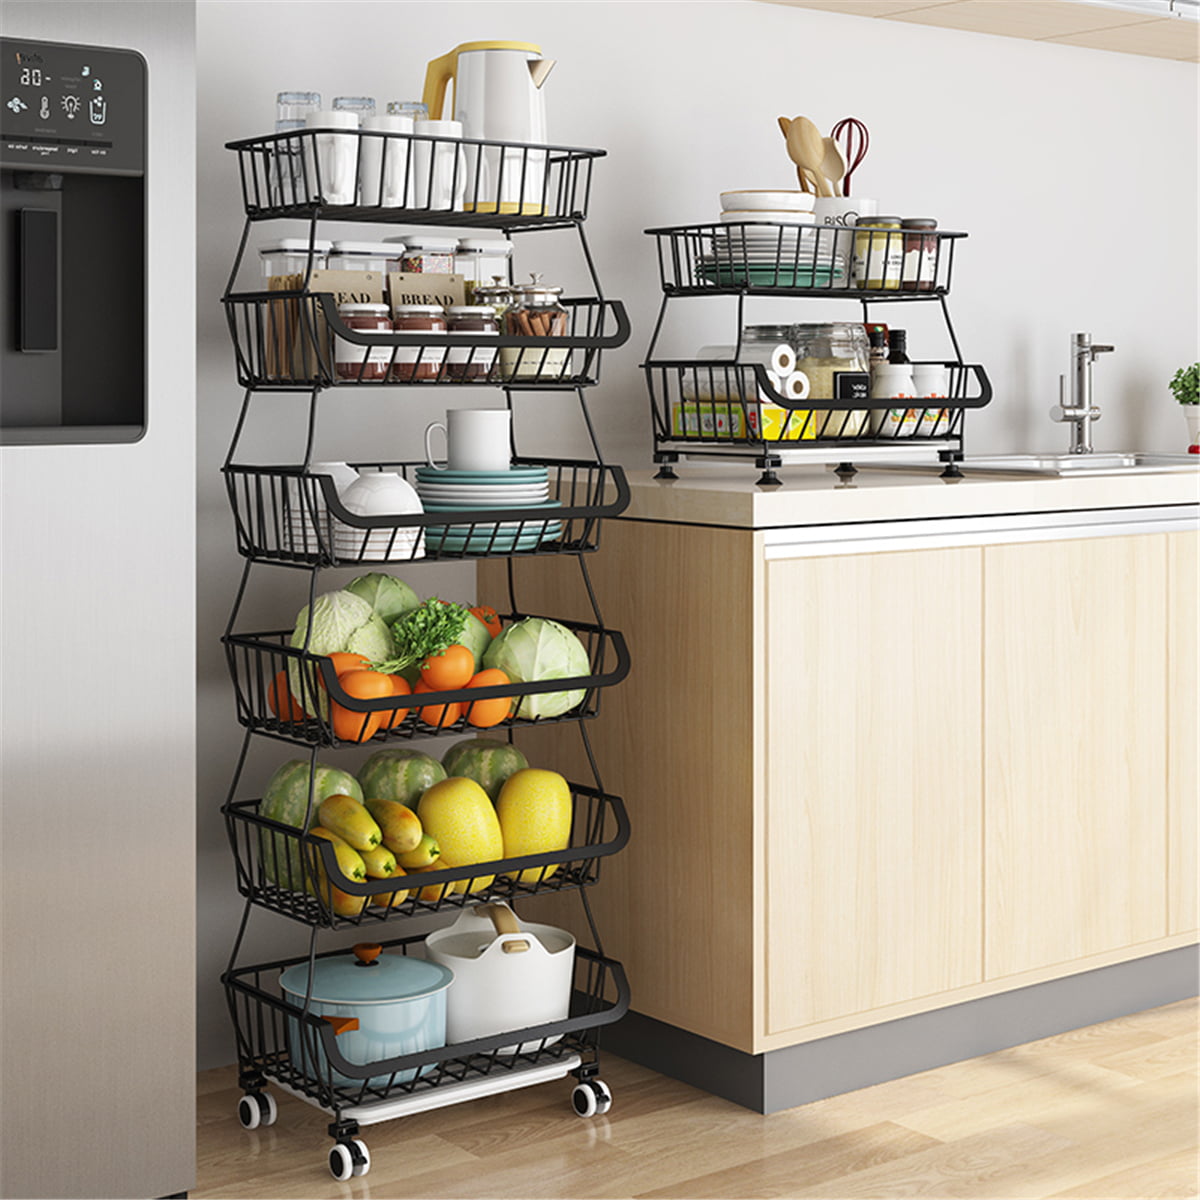 ITHWIU 5-Tier Metal Wire Vegetable and Fruit Baskets with Lockable Wheels Push-pull Basket for Kitchen Storage 